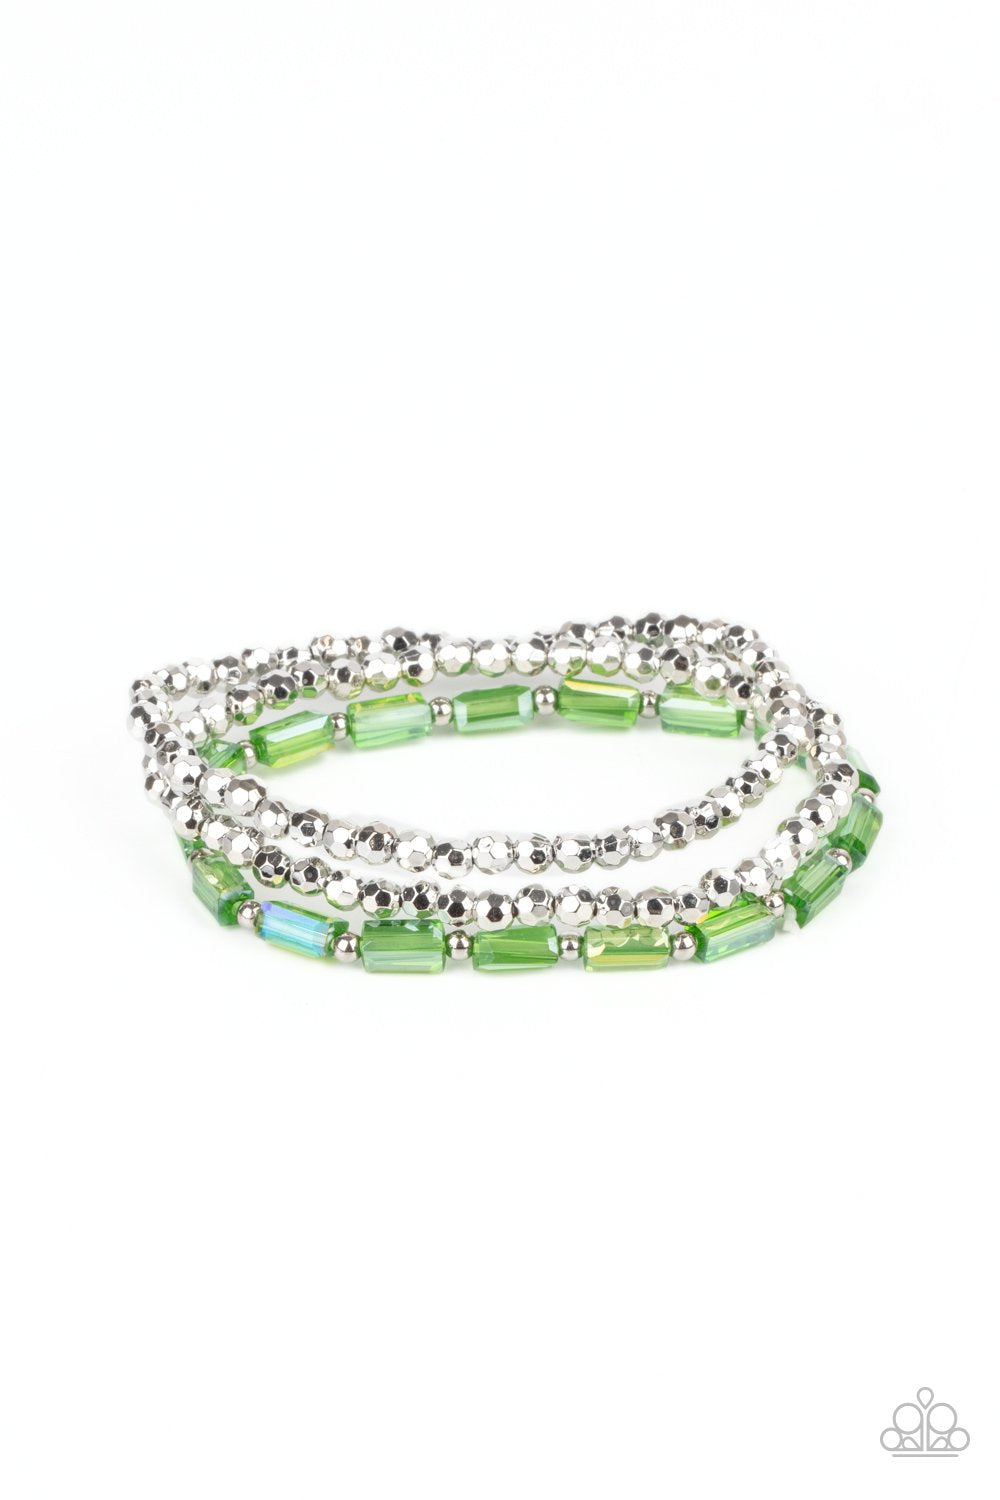 &lt;p&gt;A pair of faceted silver beaded bracelets join a strand of glassy green emerald style beads around the wrist, creating iridescently stretchy layers.&lt;/p&gt;

&lt;p&gt;&lt;i&gt; Sold as one set of three bracelets. &lt;/i&gt;&lt;/p&gt;


&lt;img src=\&quot;https://d9b54x484lq62.cloudfront.net/paparazzi/shopping/images/517_tag150x115_1.png\&quot; alt=\&quot;New Kit\&quot; align=\&quot;middle\&quot; height=\&quot;50\&quot; width=\&quot;50\&quot;&gt;